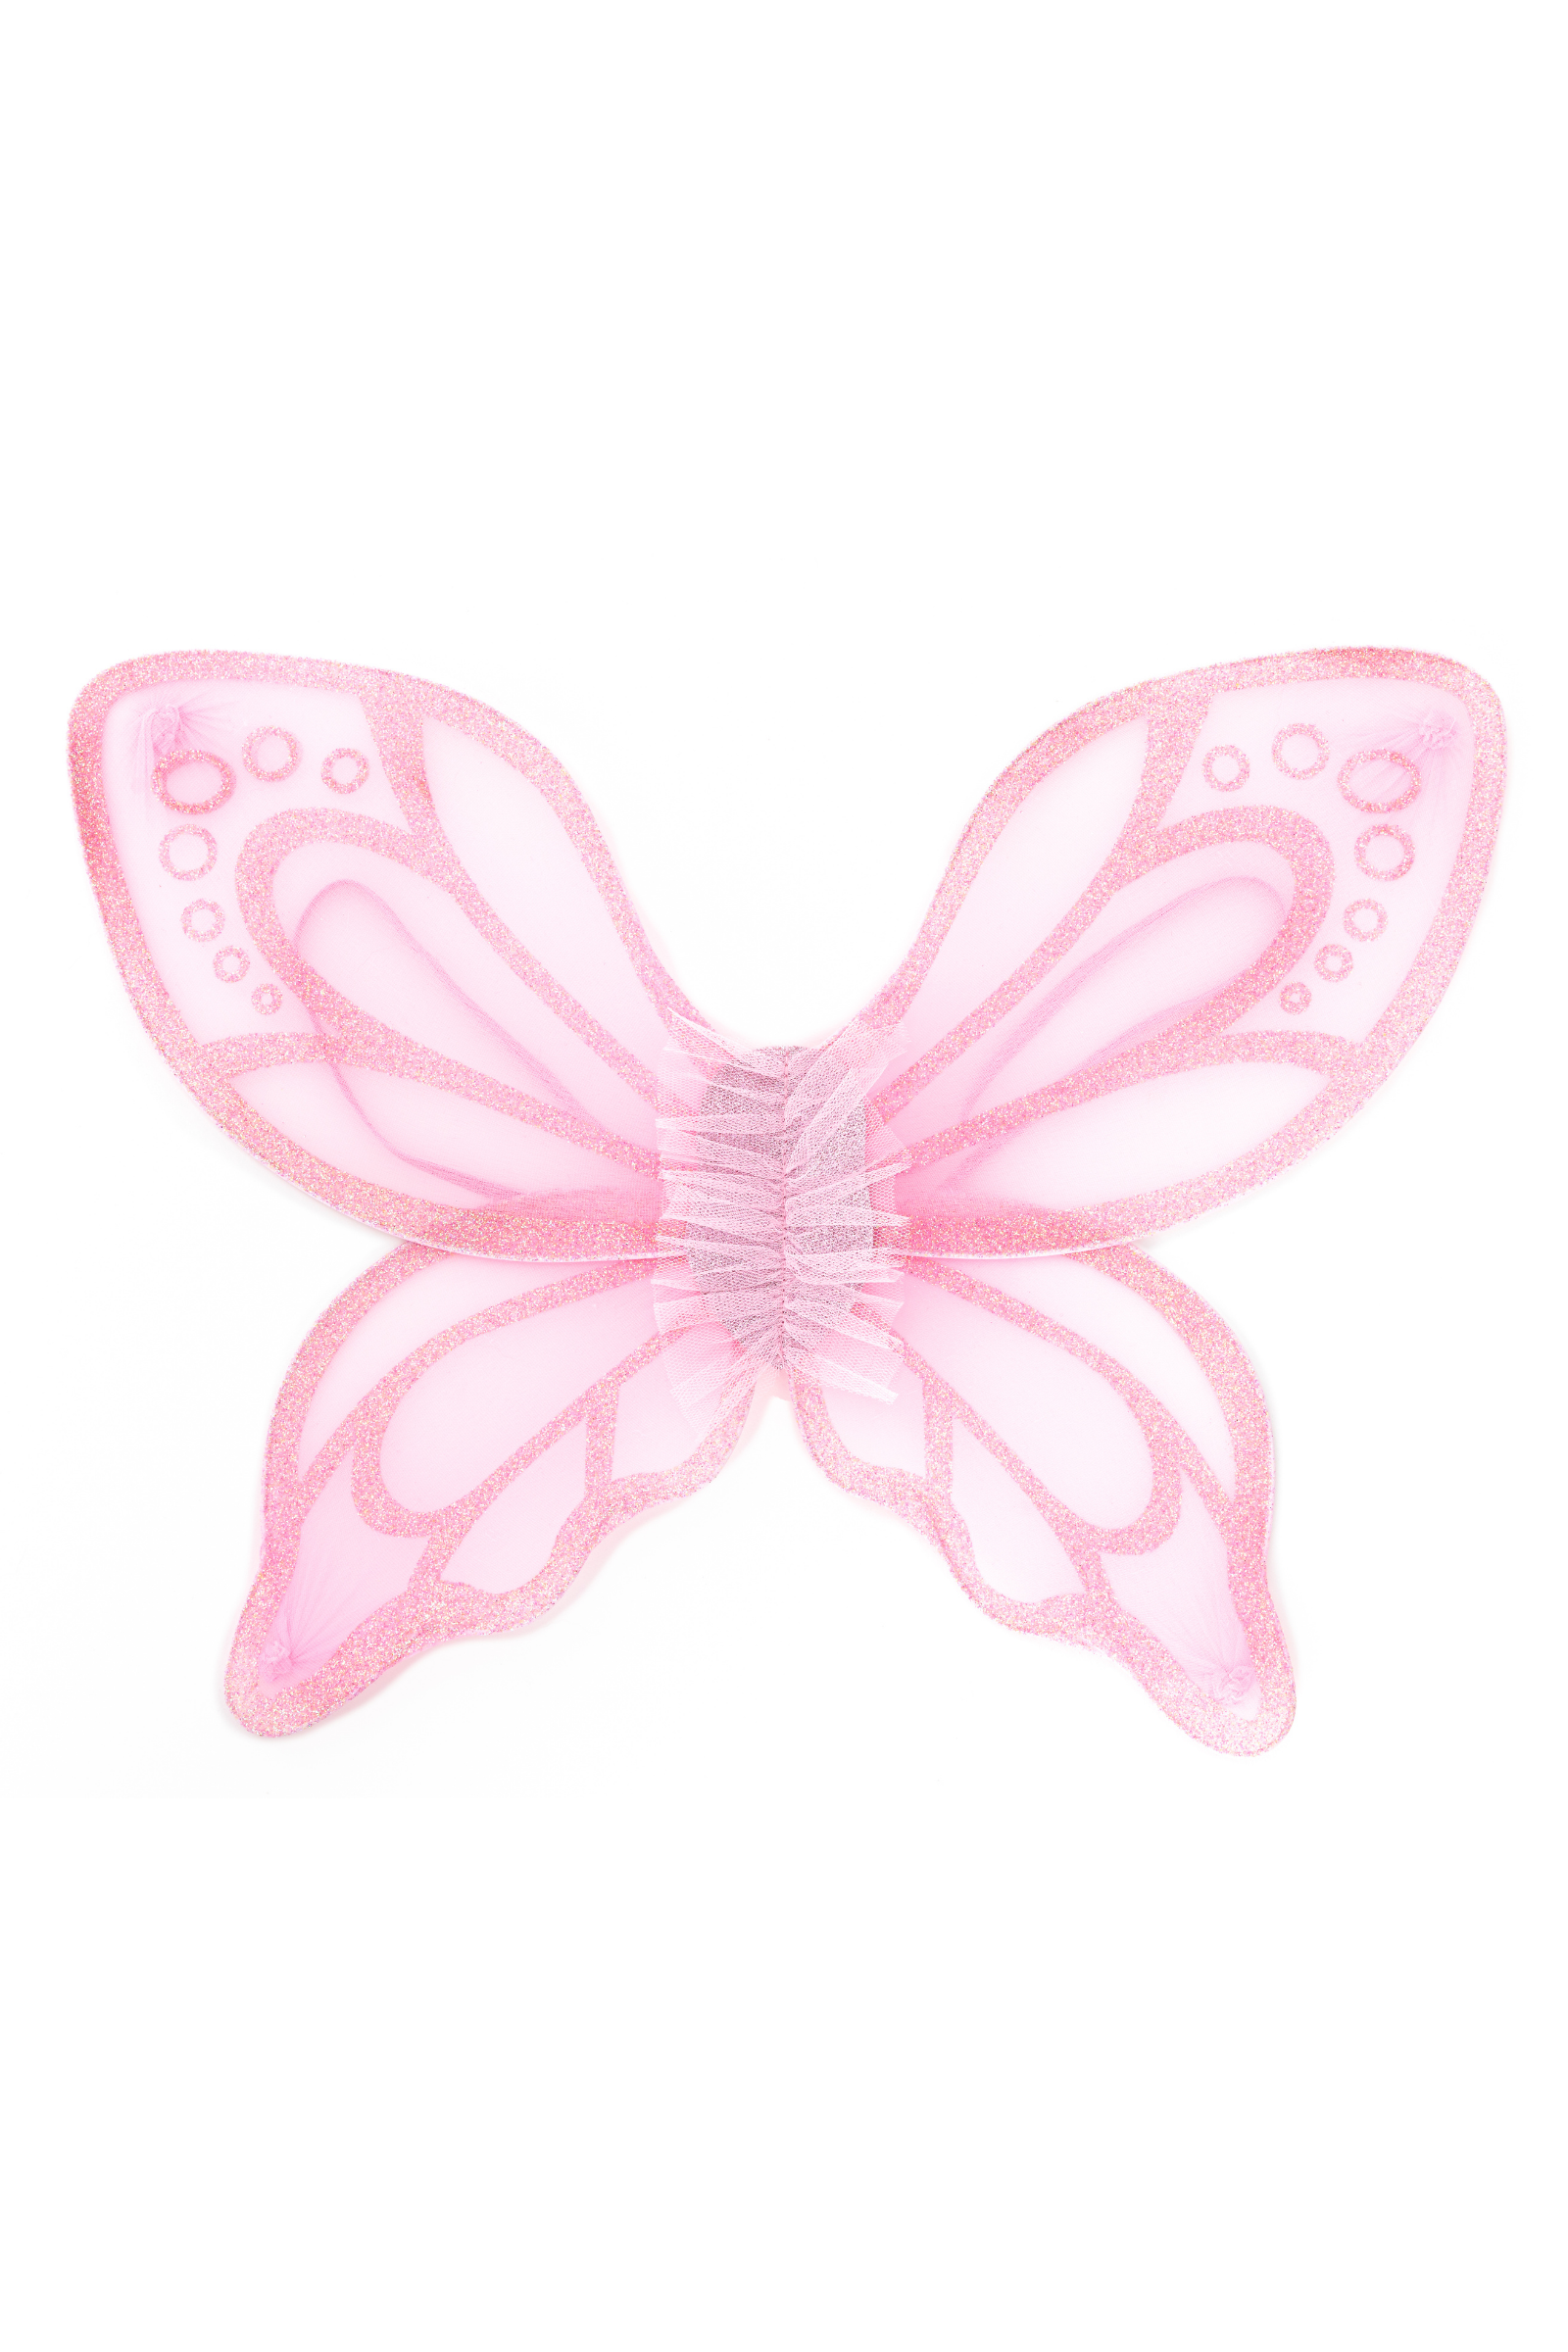 Pink Sequins Butterfly Dress & Wings